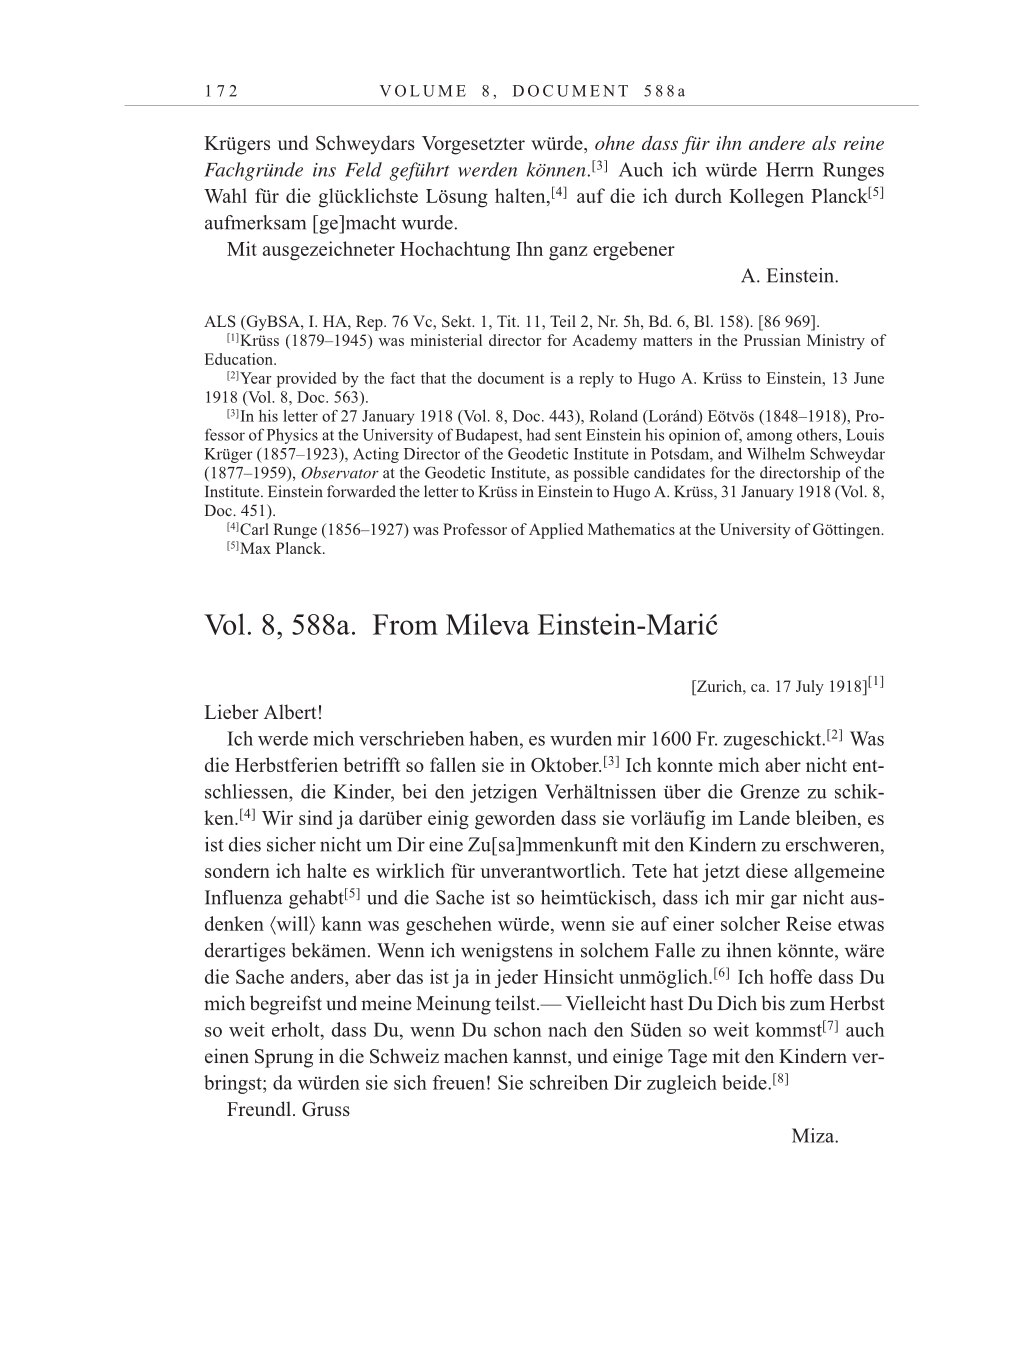 Volume 10: The Berlin Years: Correspondence May-December 1920 / Supplementary Correspondence 1909-1920 page 172